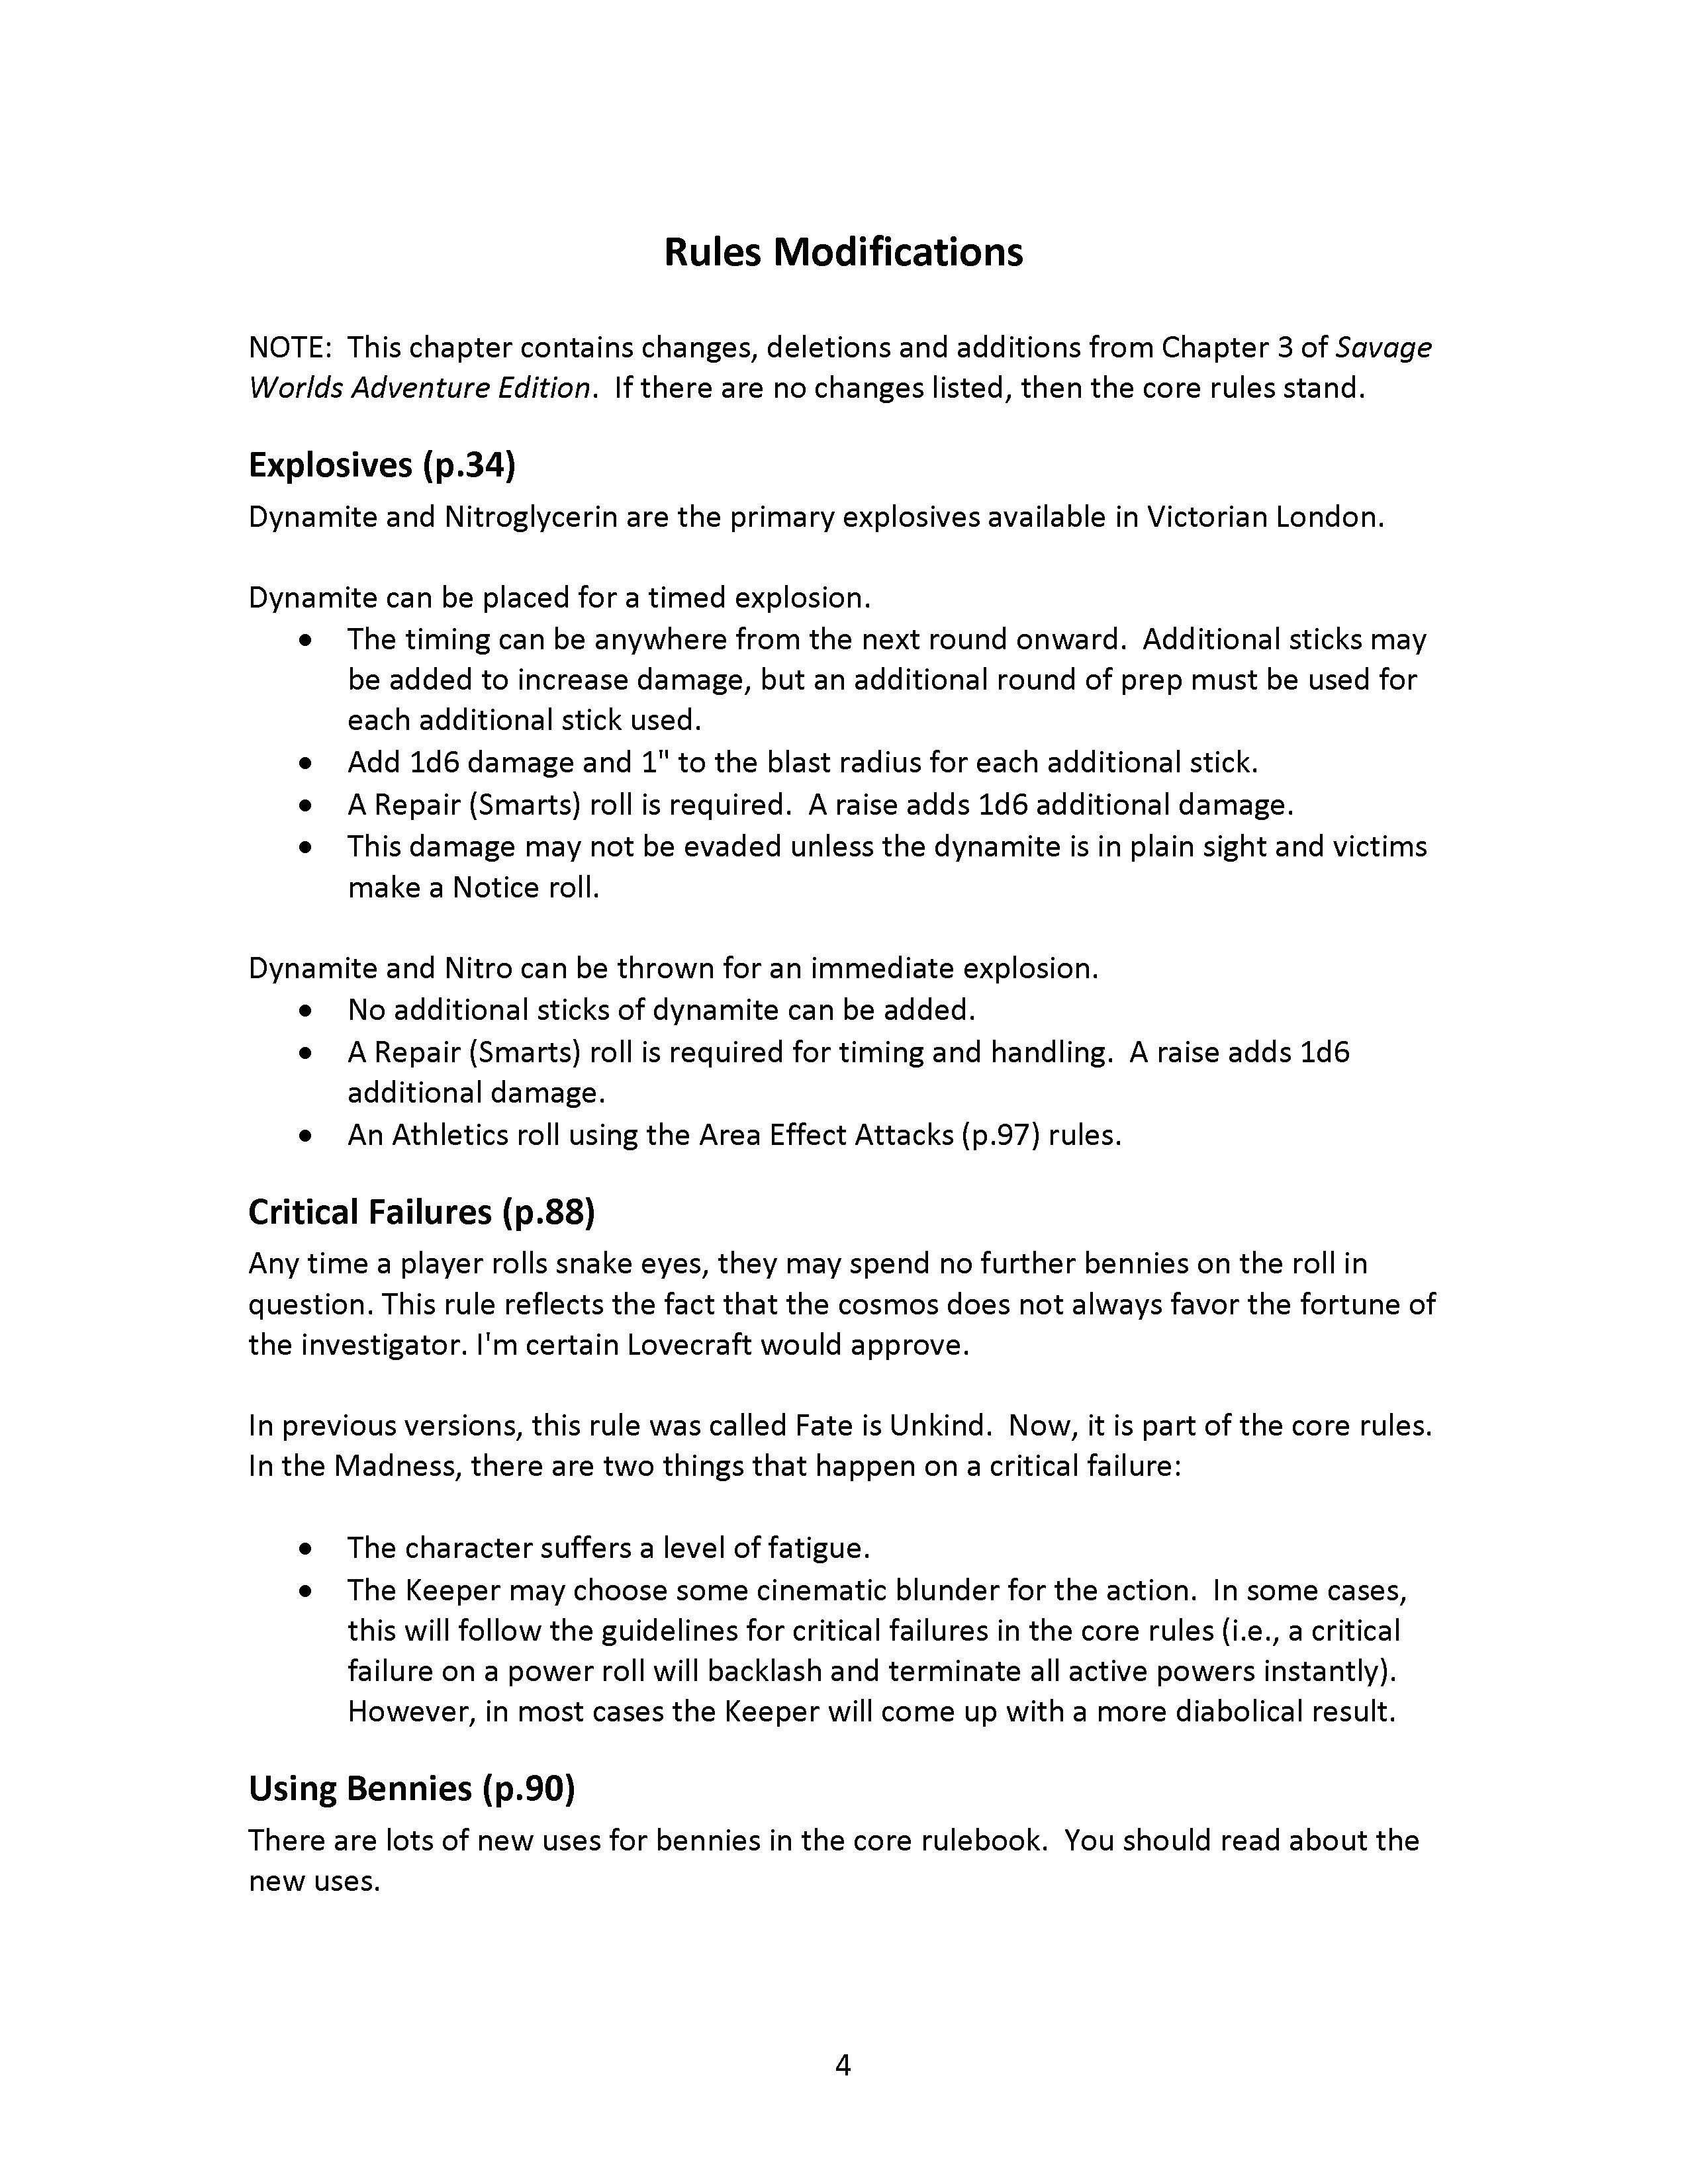 The Madness House Rules Page 05.jpg